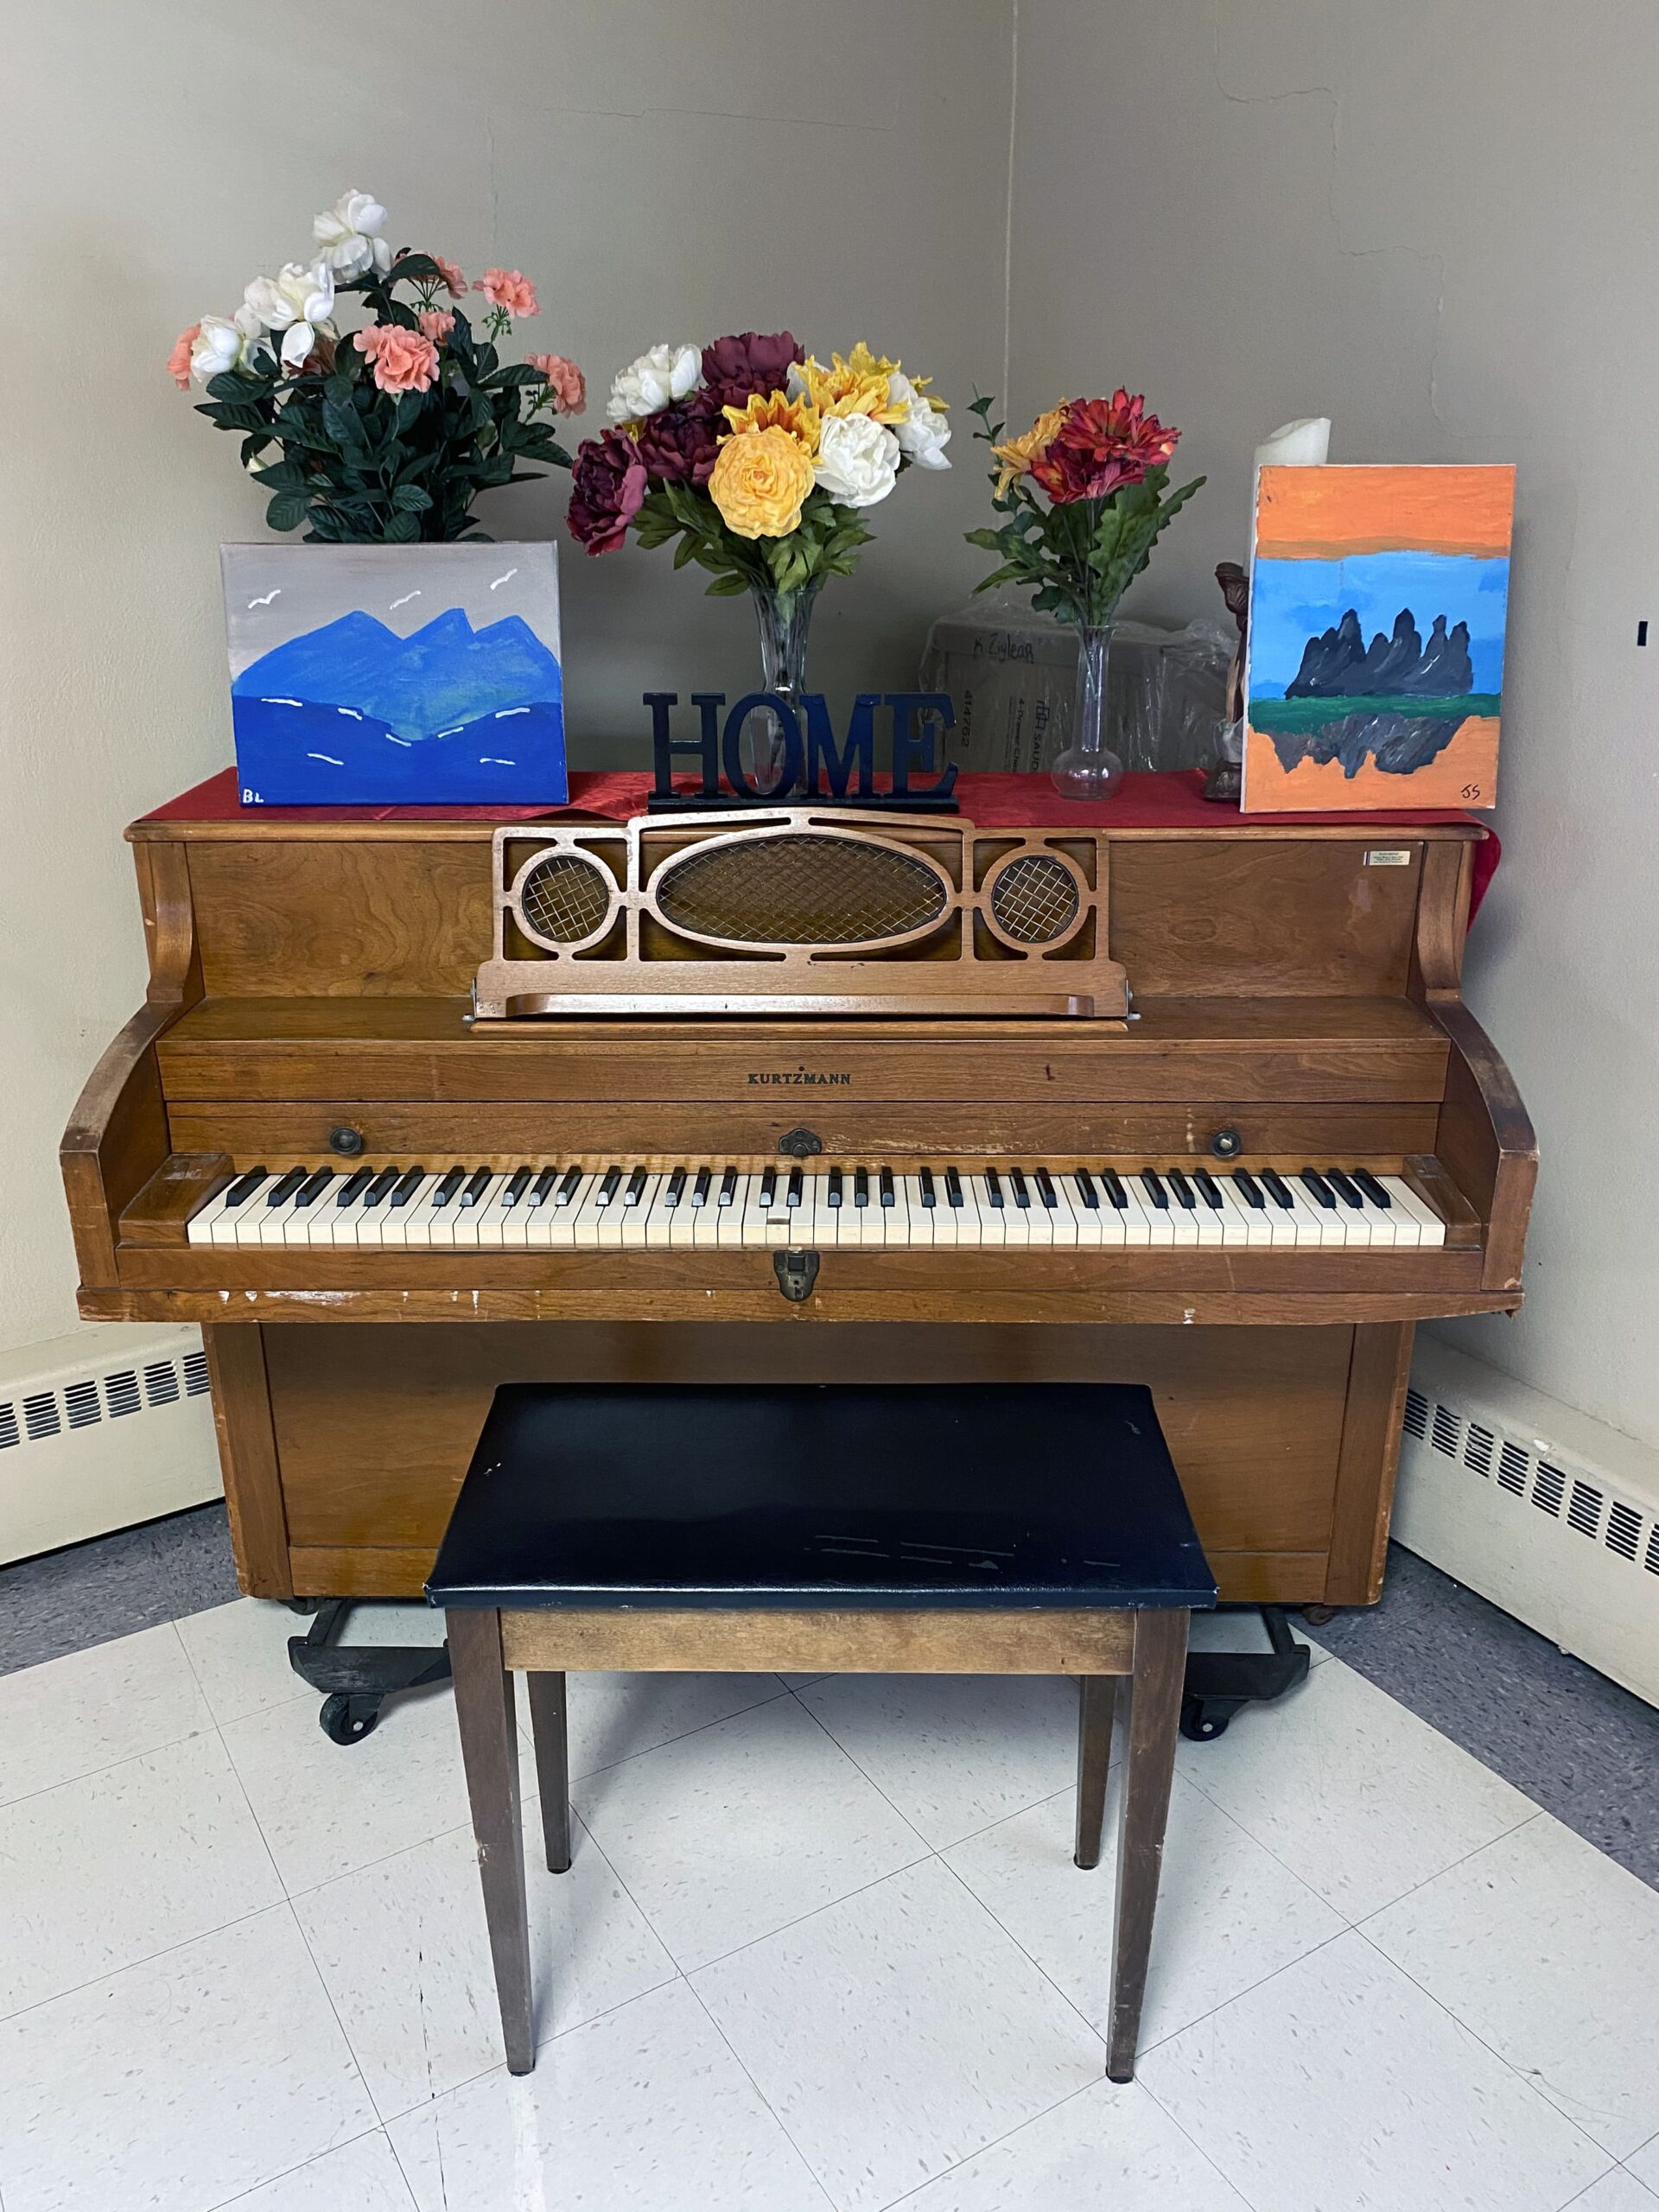 Brickyard Healthcare Twelfth Street Care Center piano for residents